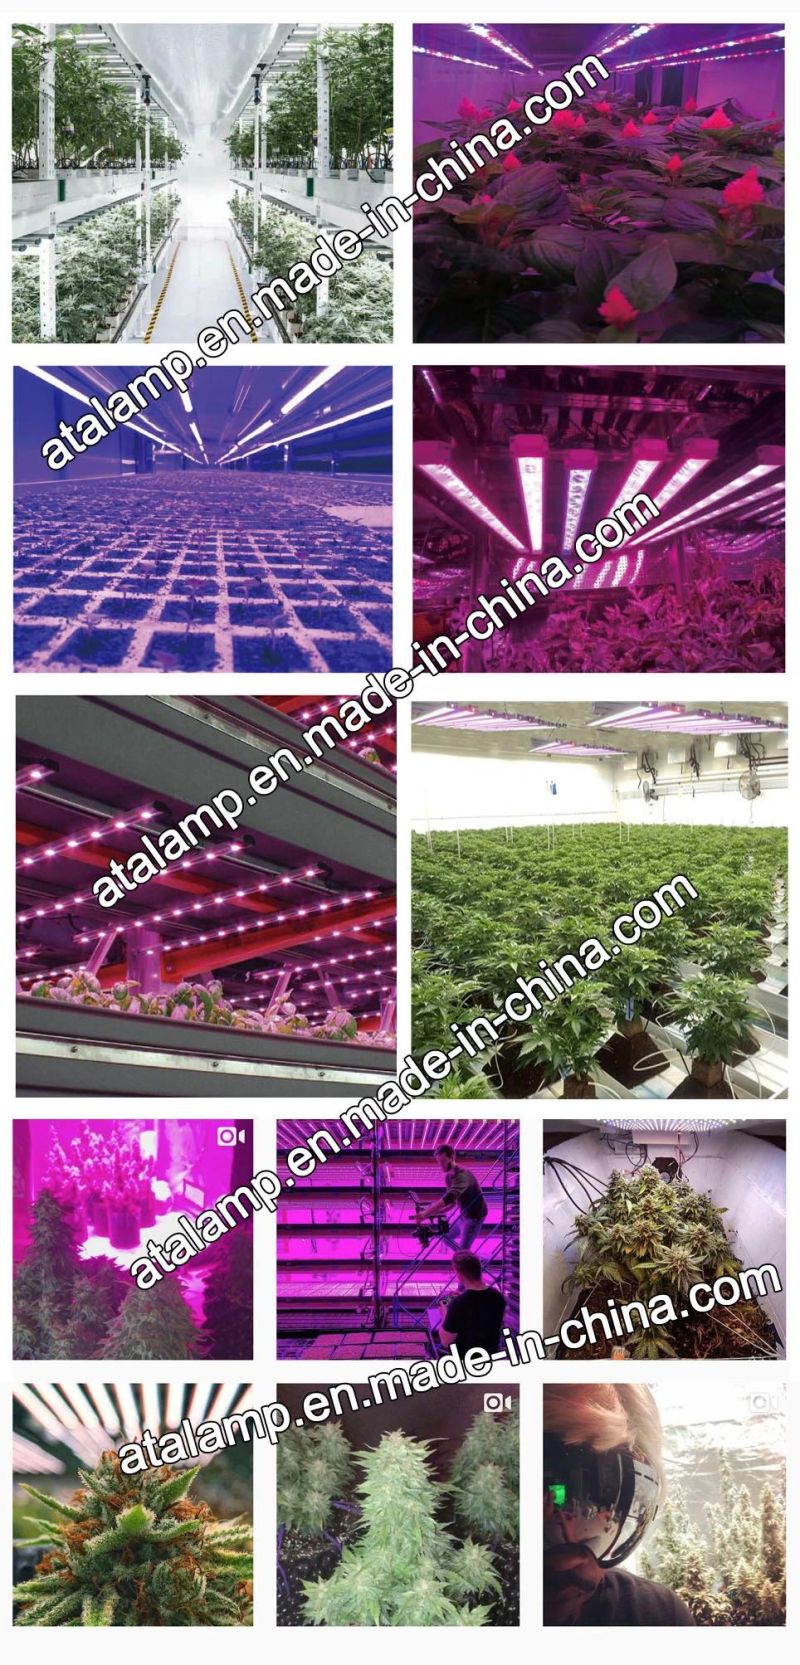 2019 Best LED Grow Light Horticultural/Hydroponics/Soil Cultivation/Substrate Culture 400W/600W/800W/1000W for Indoor Plants Growing